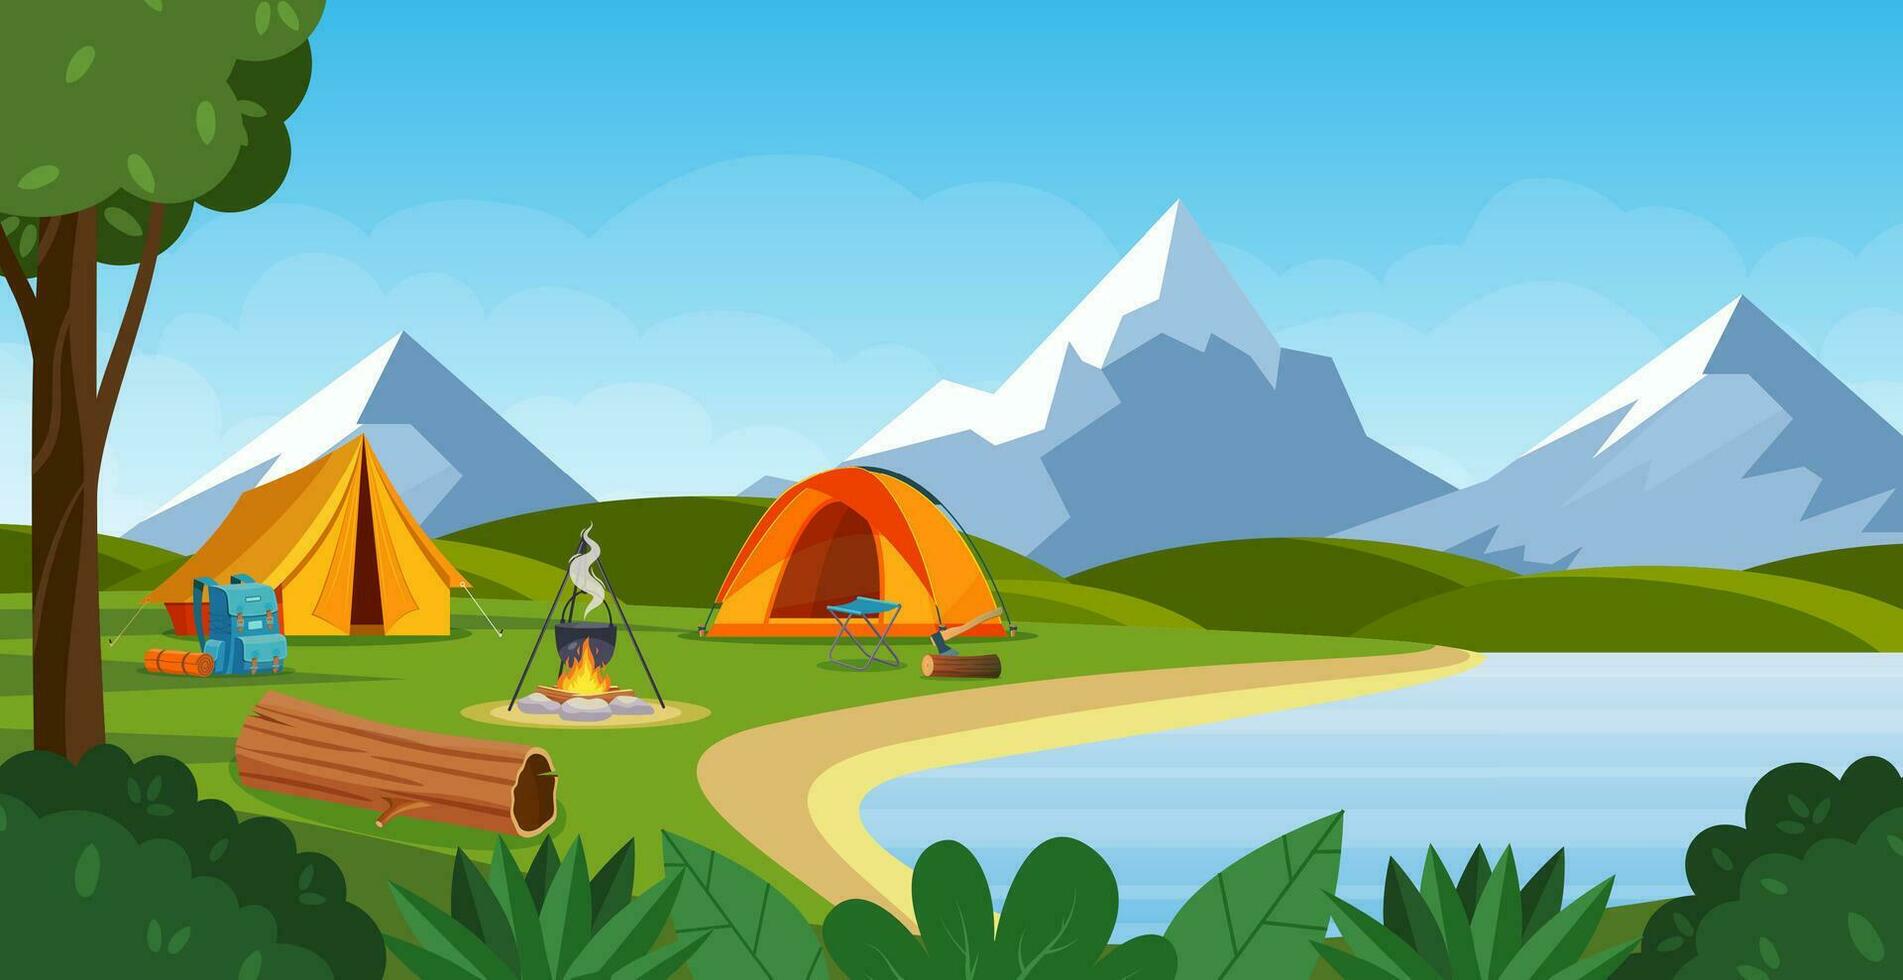 Summer camp with bonfire, tent, backpack . cartoon landscape with mountain, forest and campsite. Equipment for travel, hiking. Vector illustration in flat style